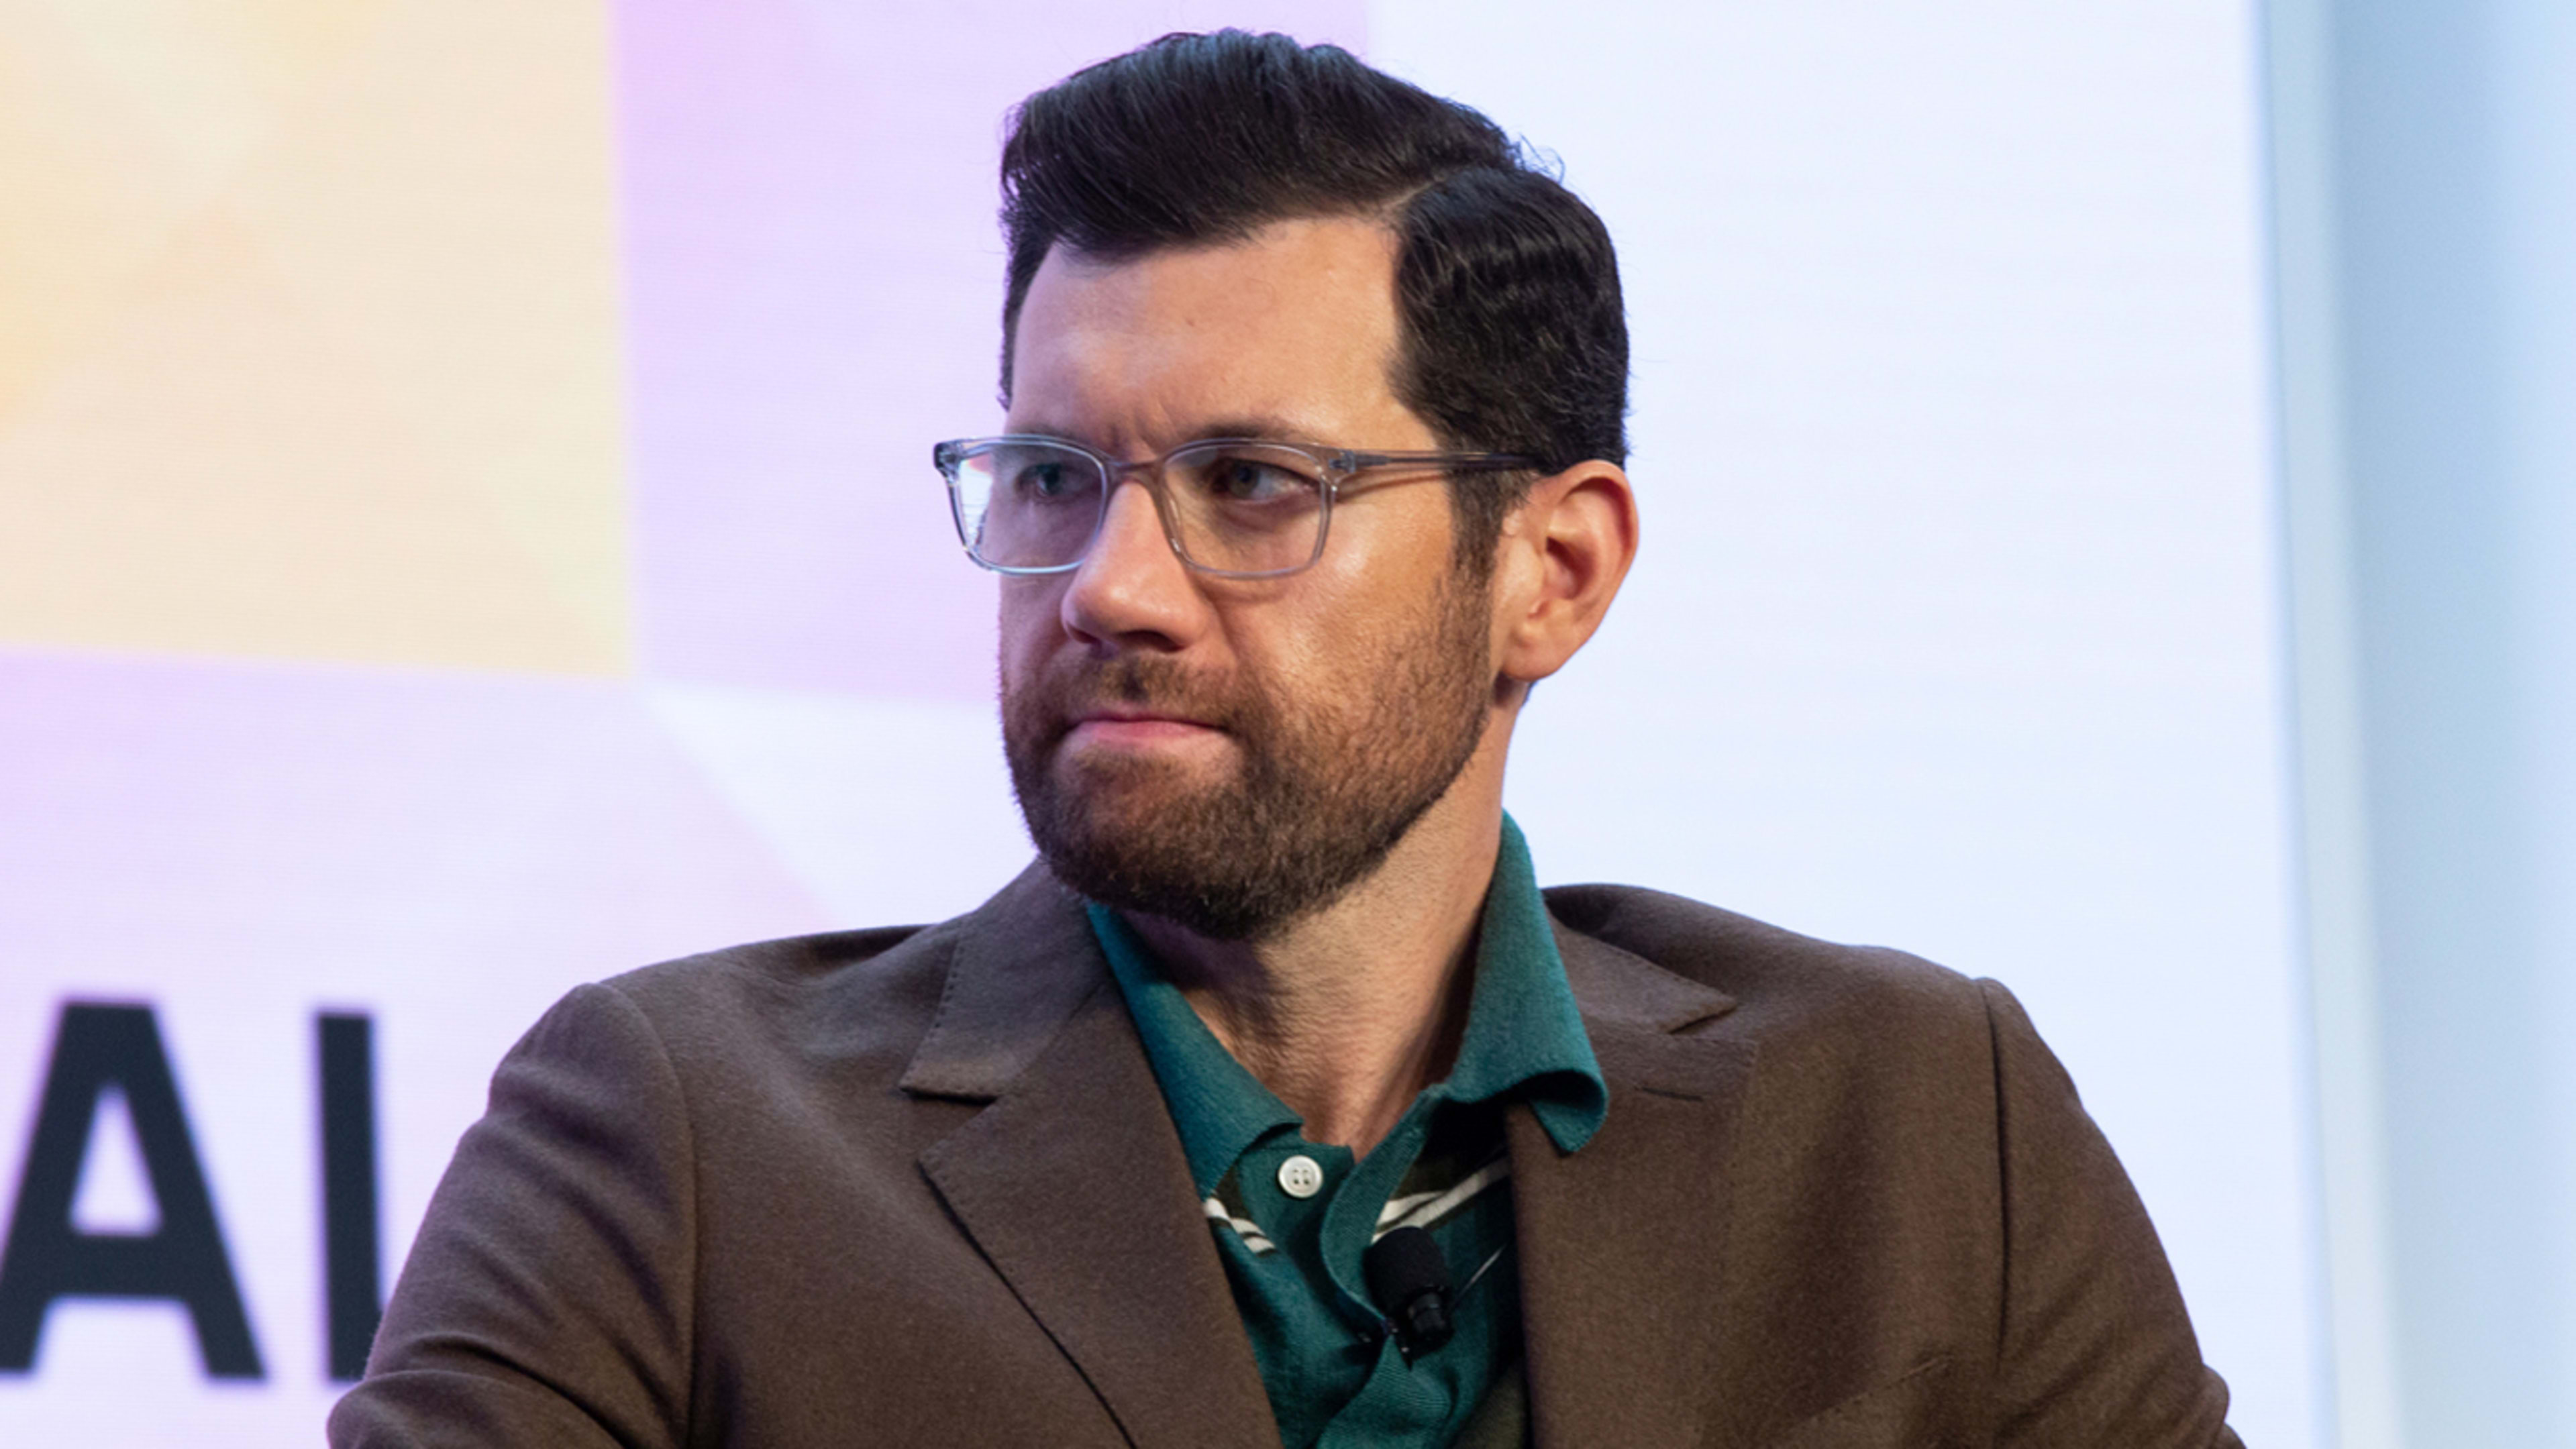 Billy Eichner wants his historic gay rom-com to get people to fall back in love with movie theaters